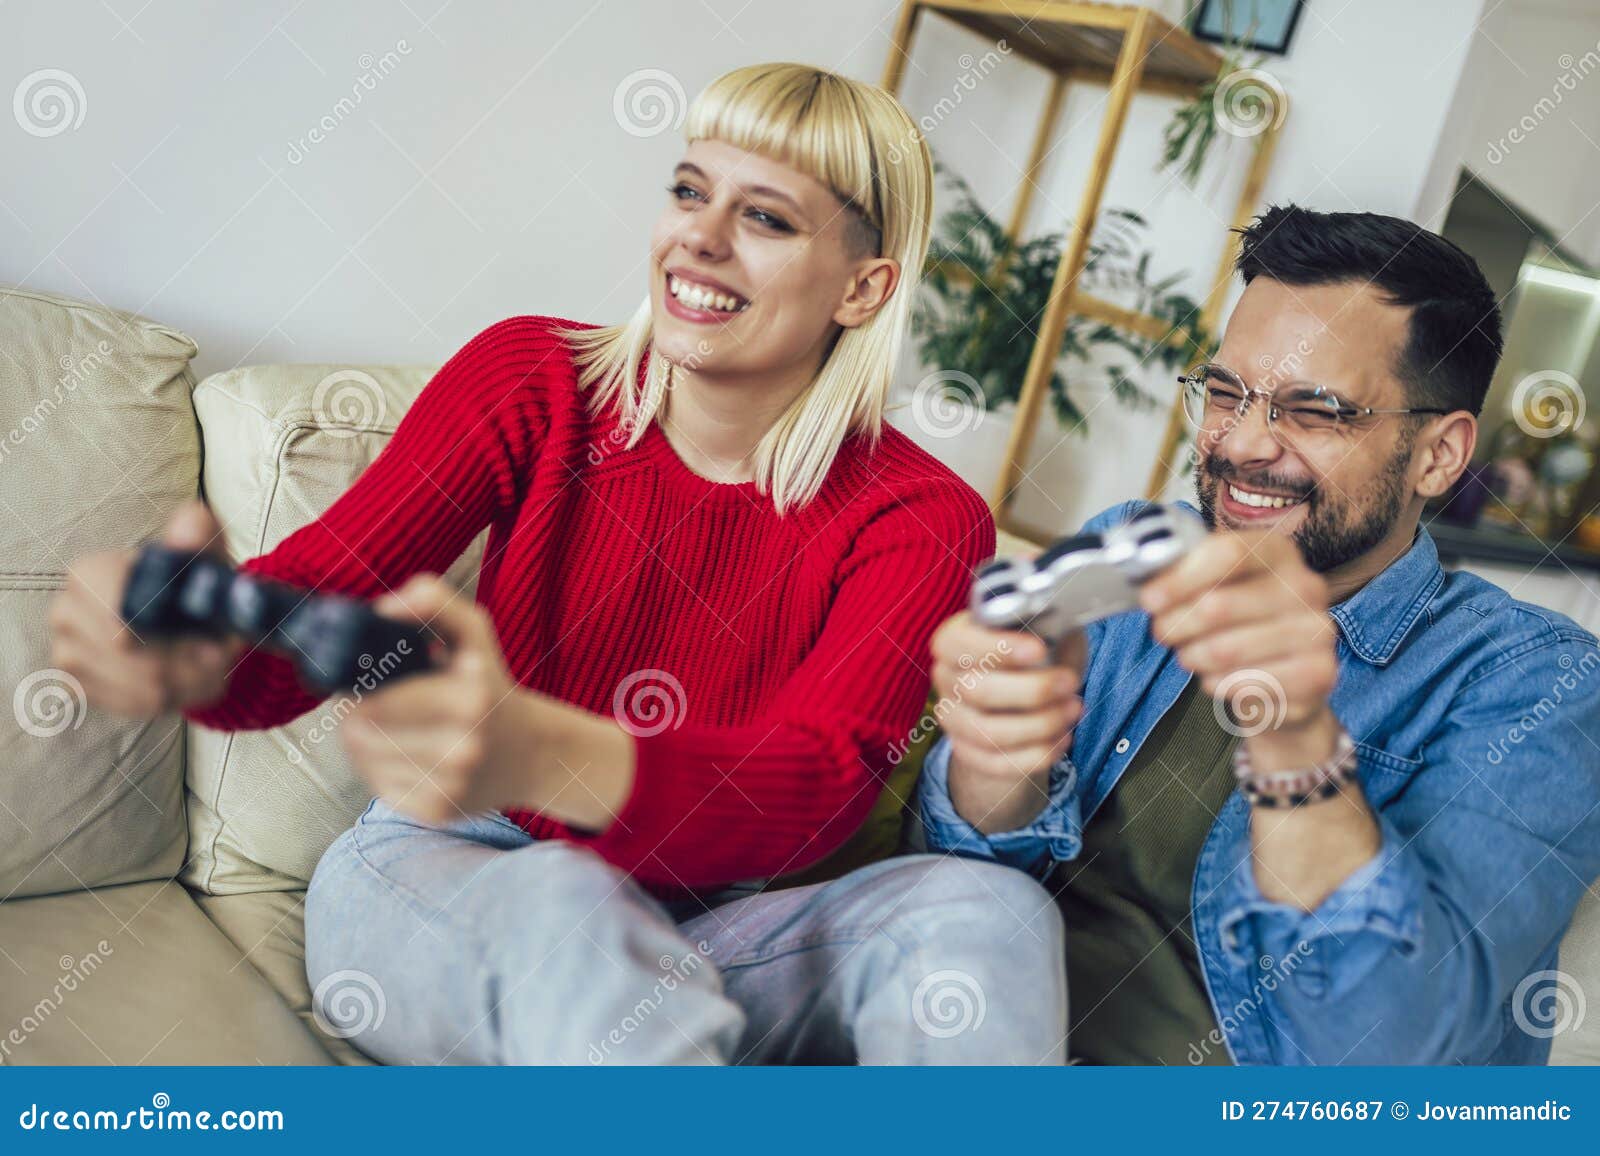 Free Photo  Boyfriend and girlfriend playing video games with controller  on console. modern couple holding joystick to play online game together,  using accessories to have fun. leisure activity